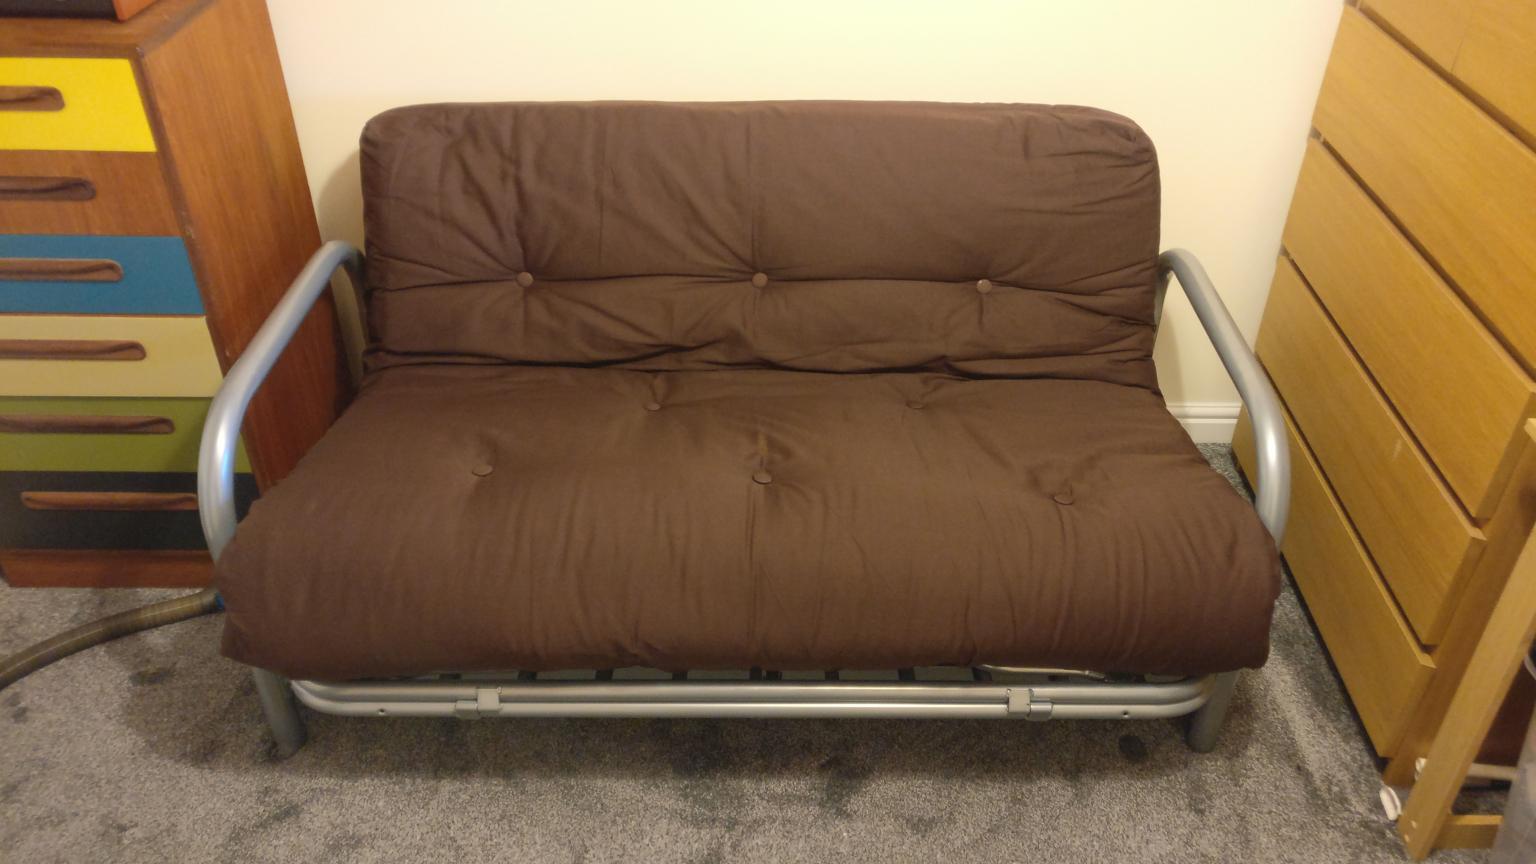 Argos Home Mexico 2 Seater Futon Sofa Bed in S66 Rotherham for £110.00